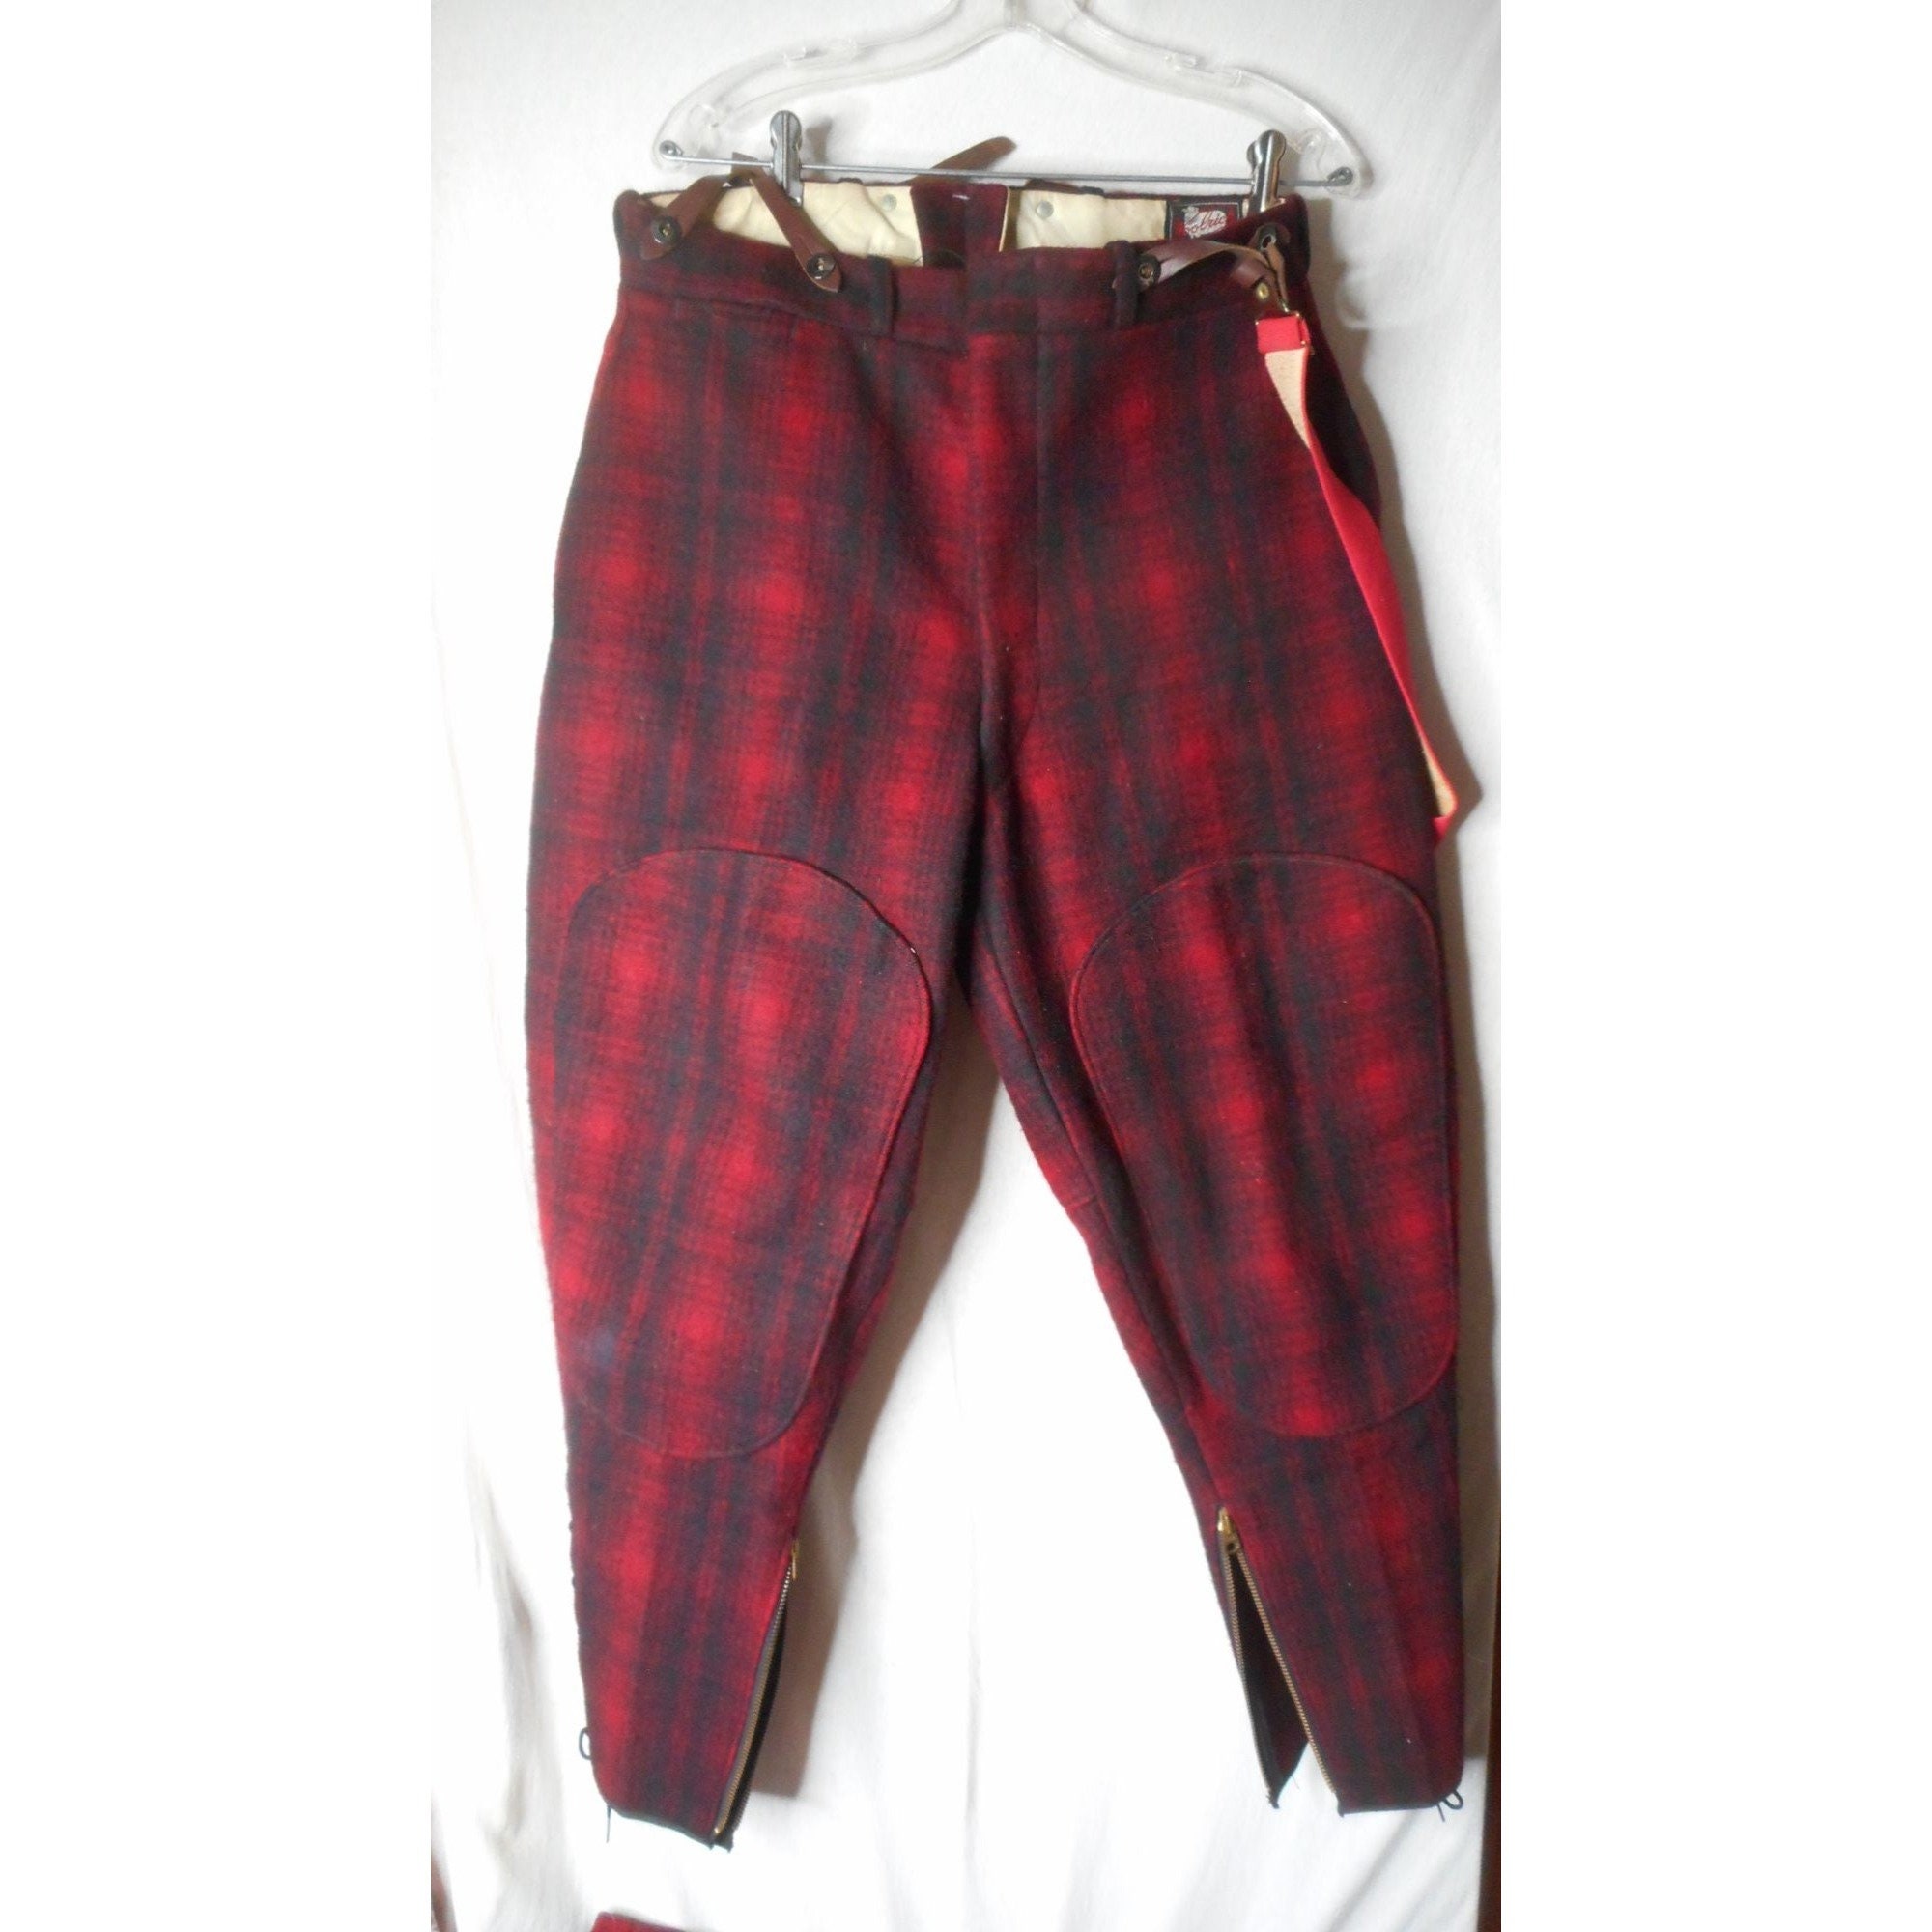 1950s Plaid Pants w/ Buckles Red Green Pedal Pushers Cigarette Pants 50s  Pockets